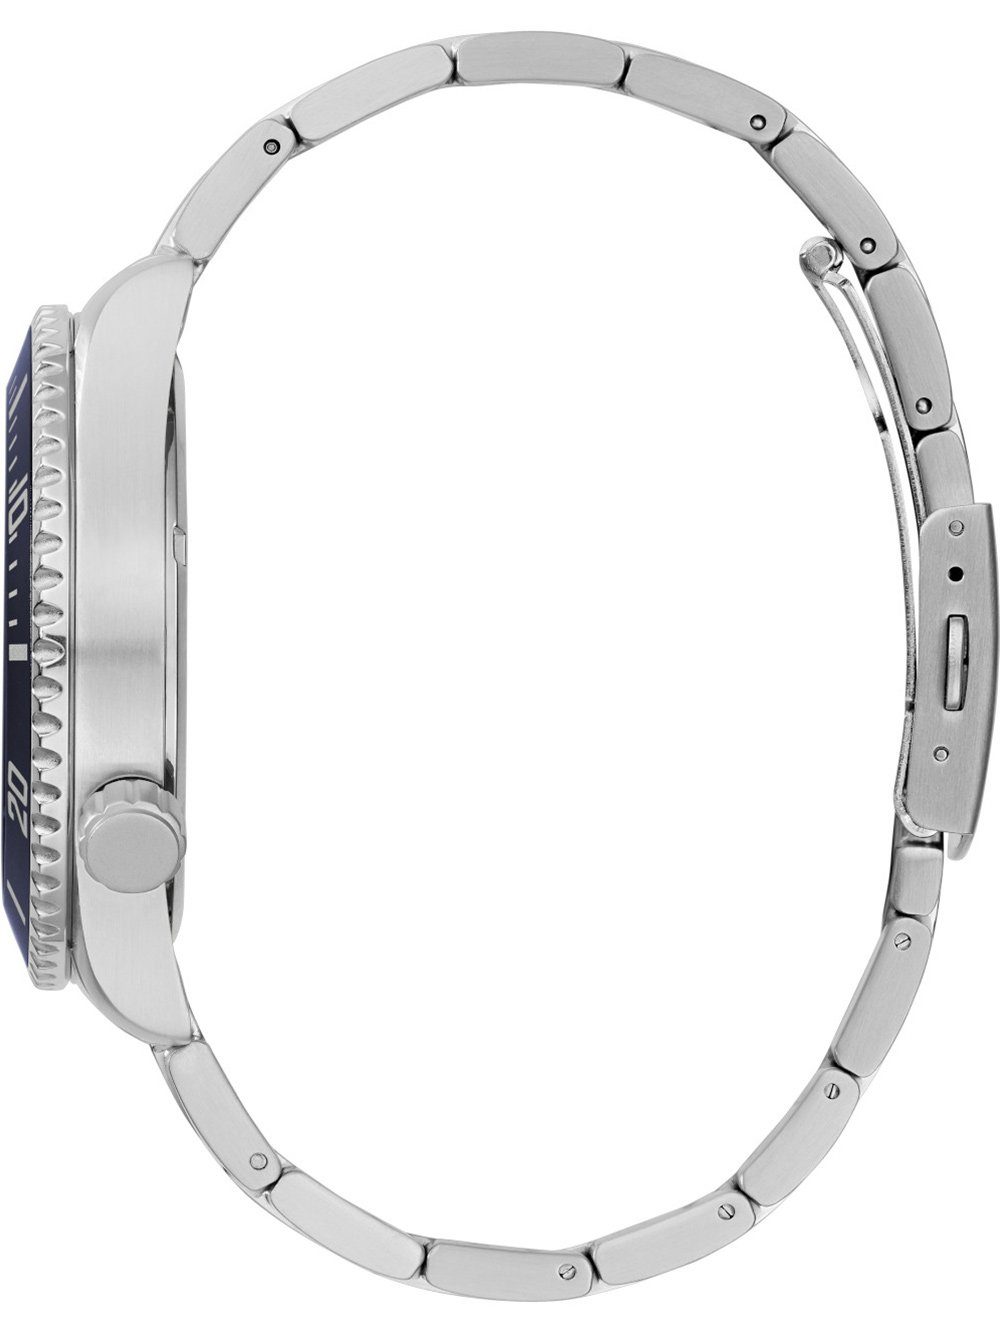 Guess Multifunktionsuhr Guess GW0488G1 Herrenuhr Axle 45mm 5ATM